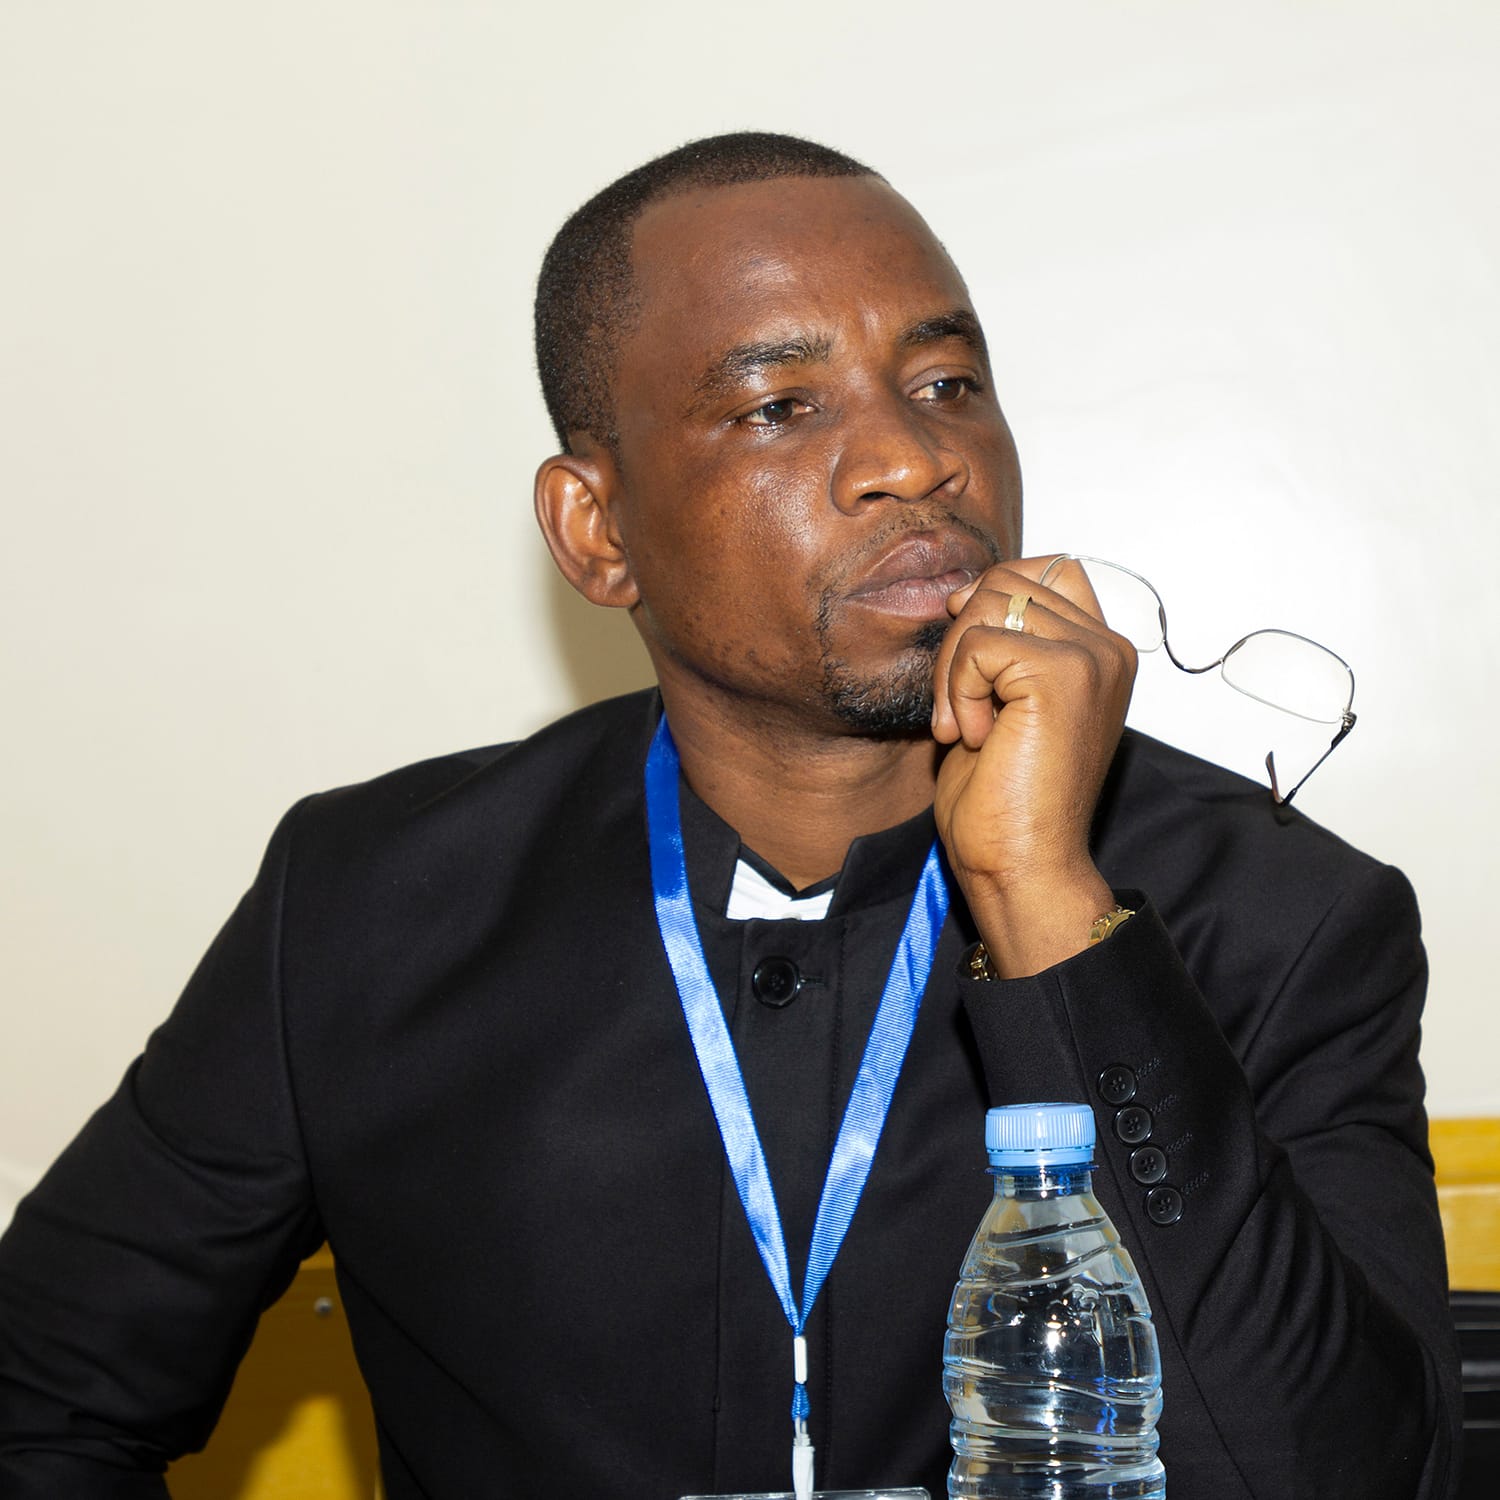 Dr Digas Ngolo Tete at the World Conference of Francophone Science Journalists